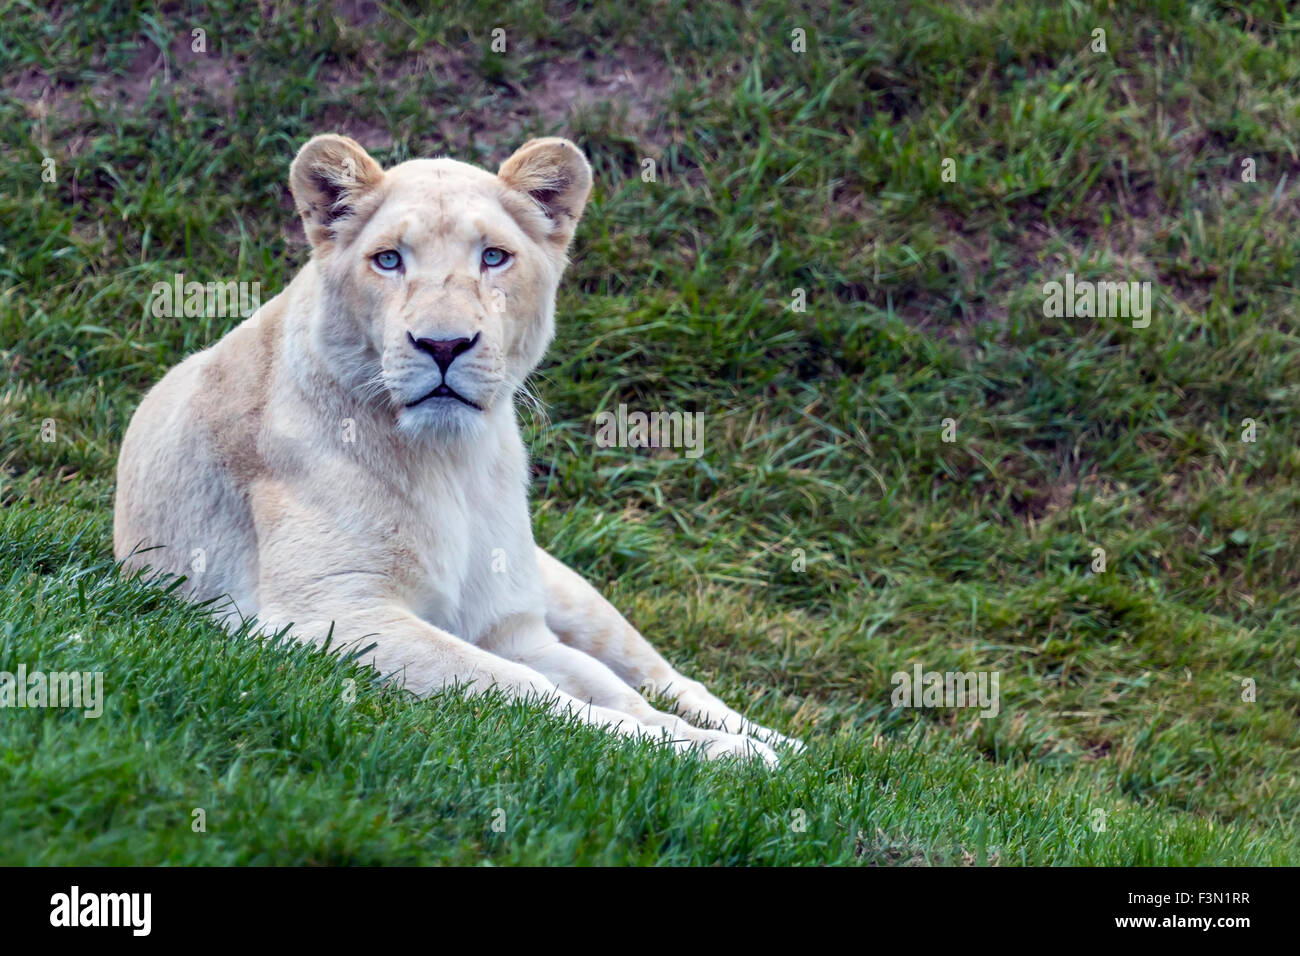 One of the White Lions at the local zoo, staring at the camera. Stock Photo